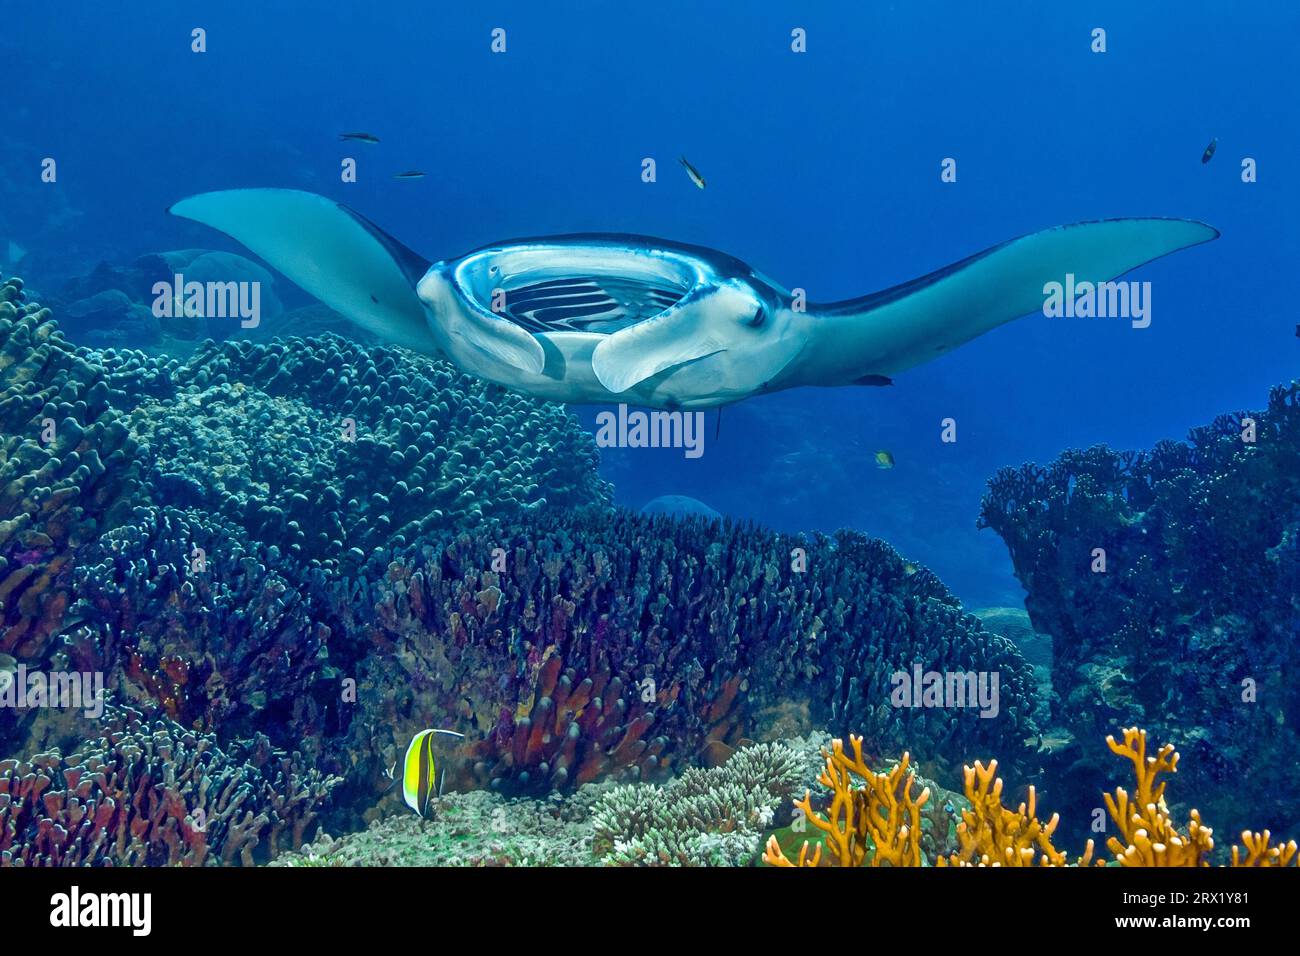 Symbiotic behaviour Symbiosis of reef manta ray (Manta alfredi) Manta ray hovers with open mouth over cleaner wrasse (Labroides dimidiatus) cleaner Stock Photo